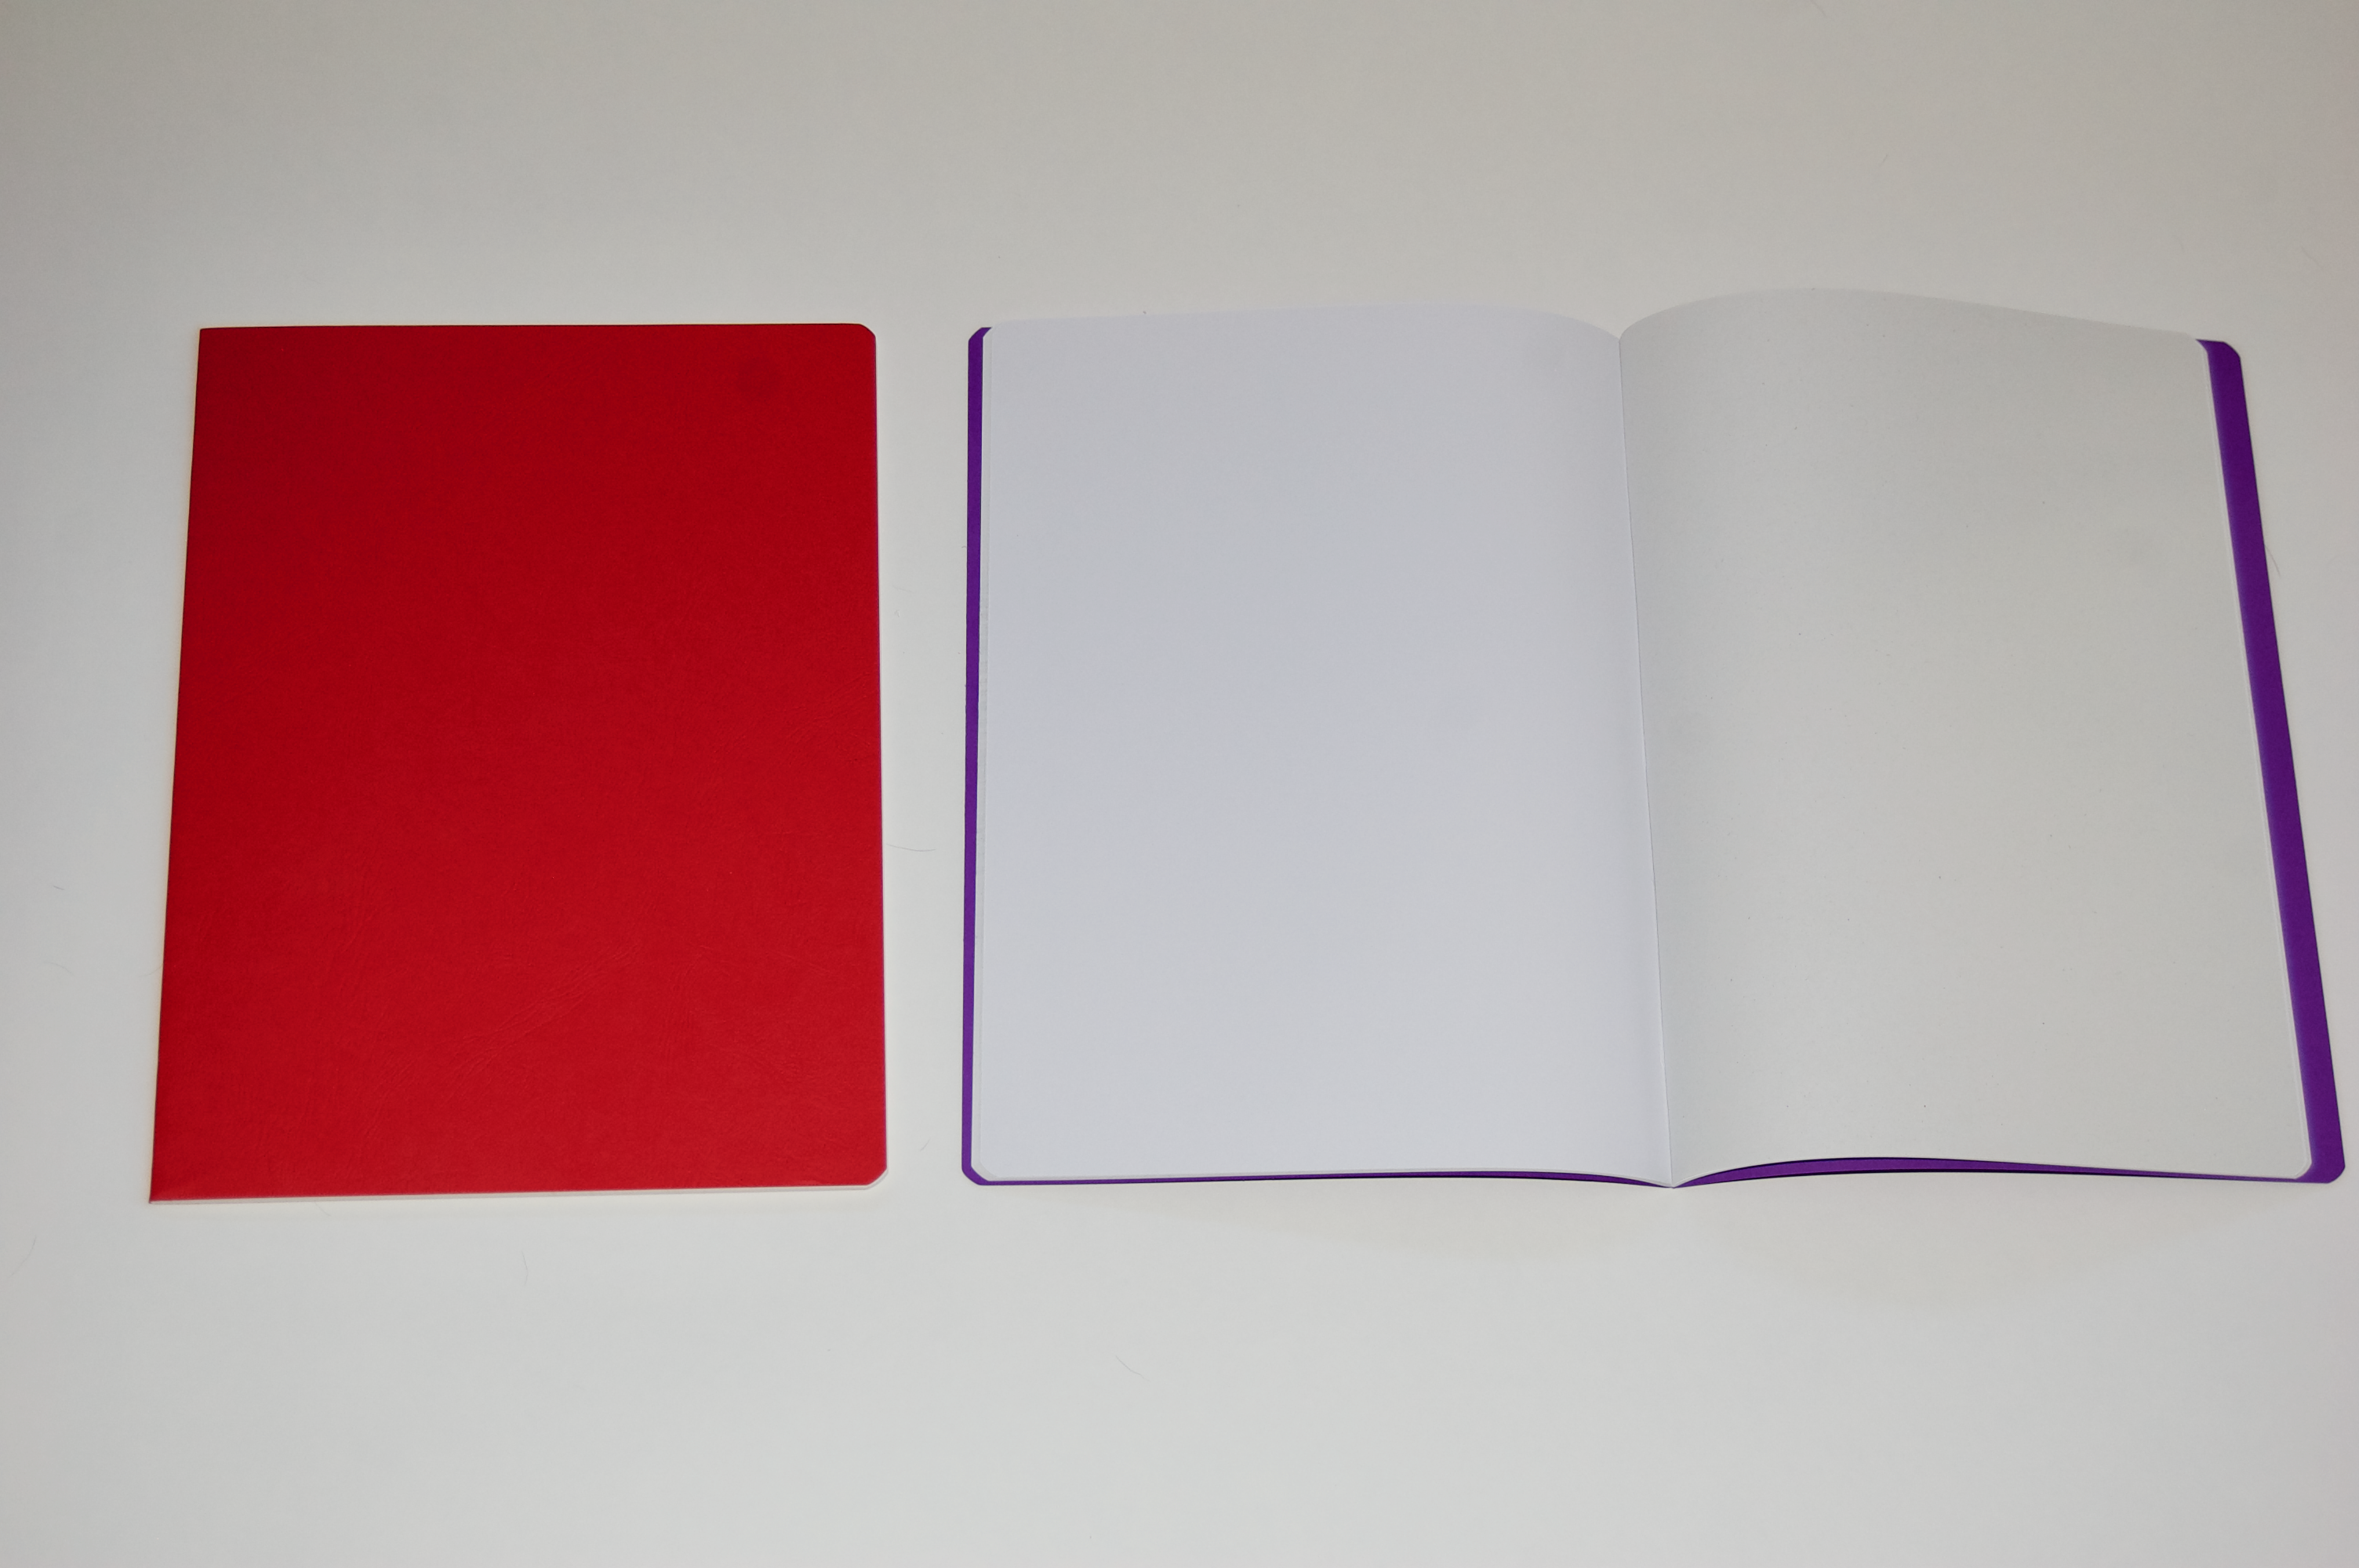 Main Lesson Book in Red with Onion Skin 2